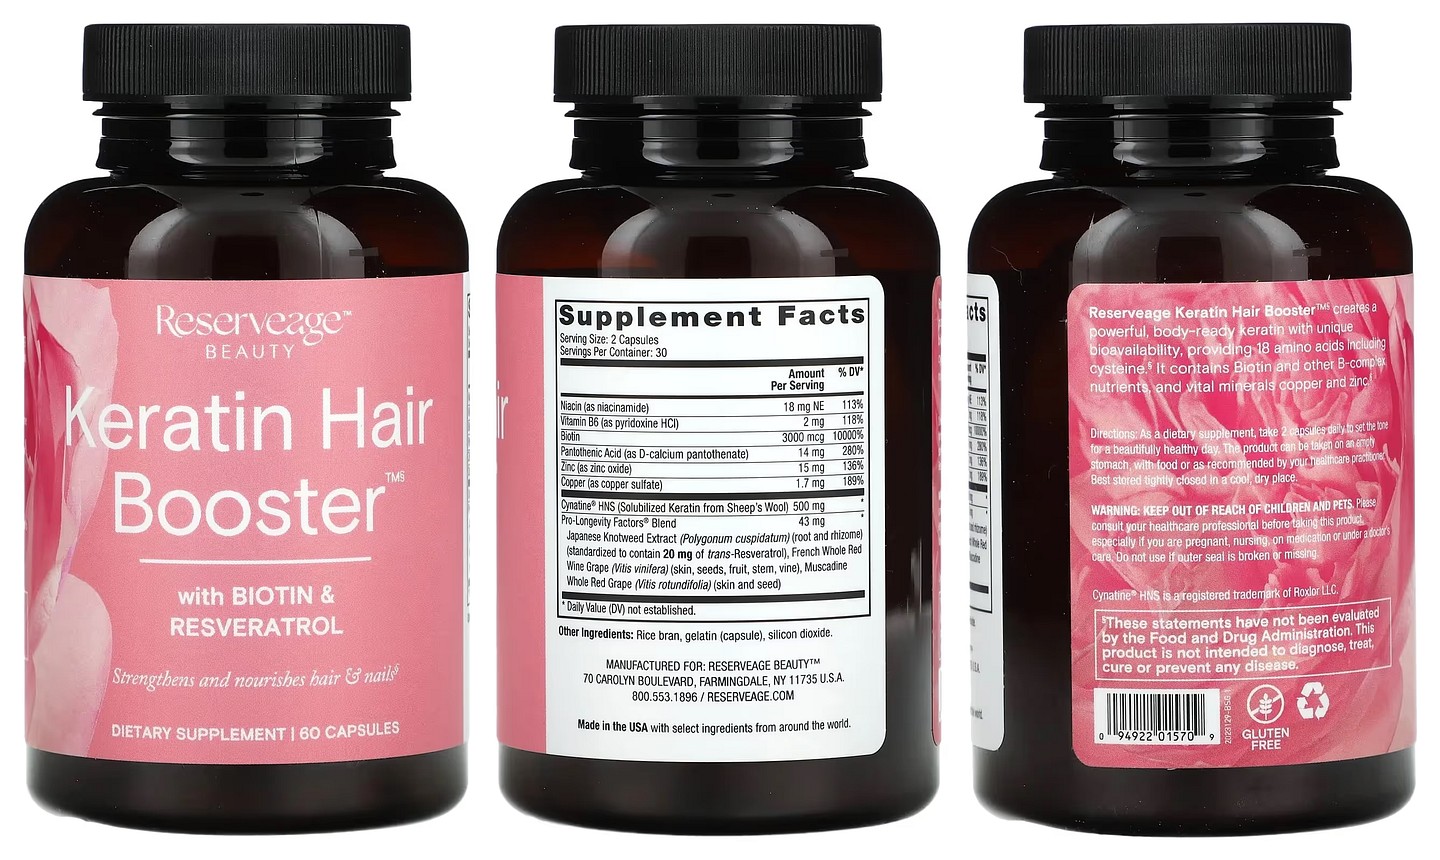 Reserveage Nutrition, Keratin Hair Booster with Biotin & Resveratrol packaging